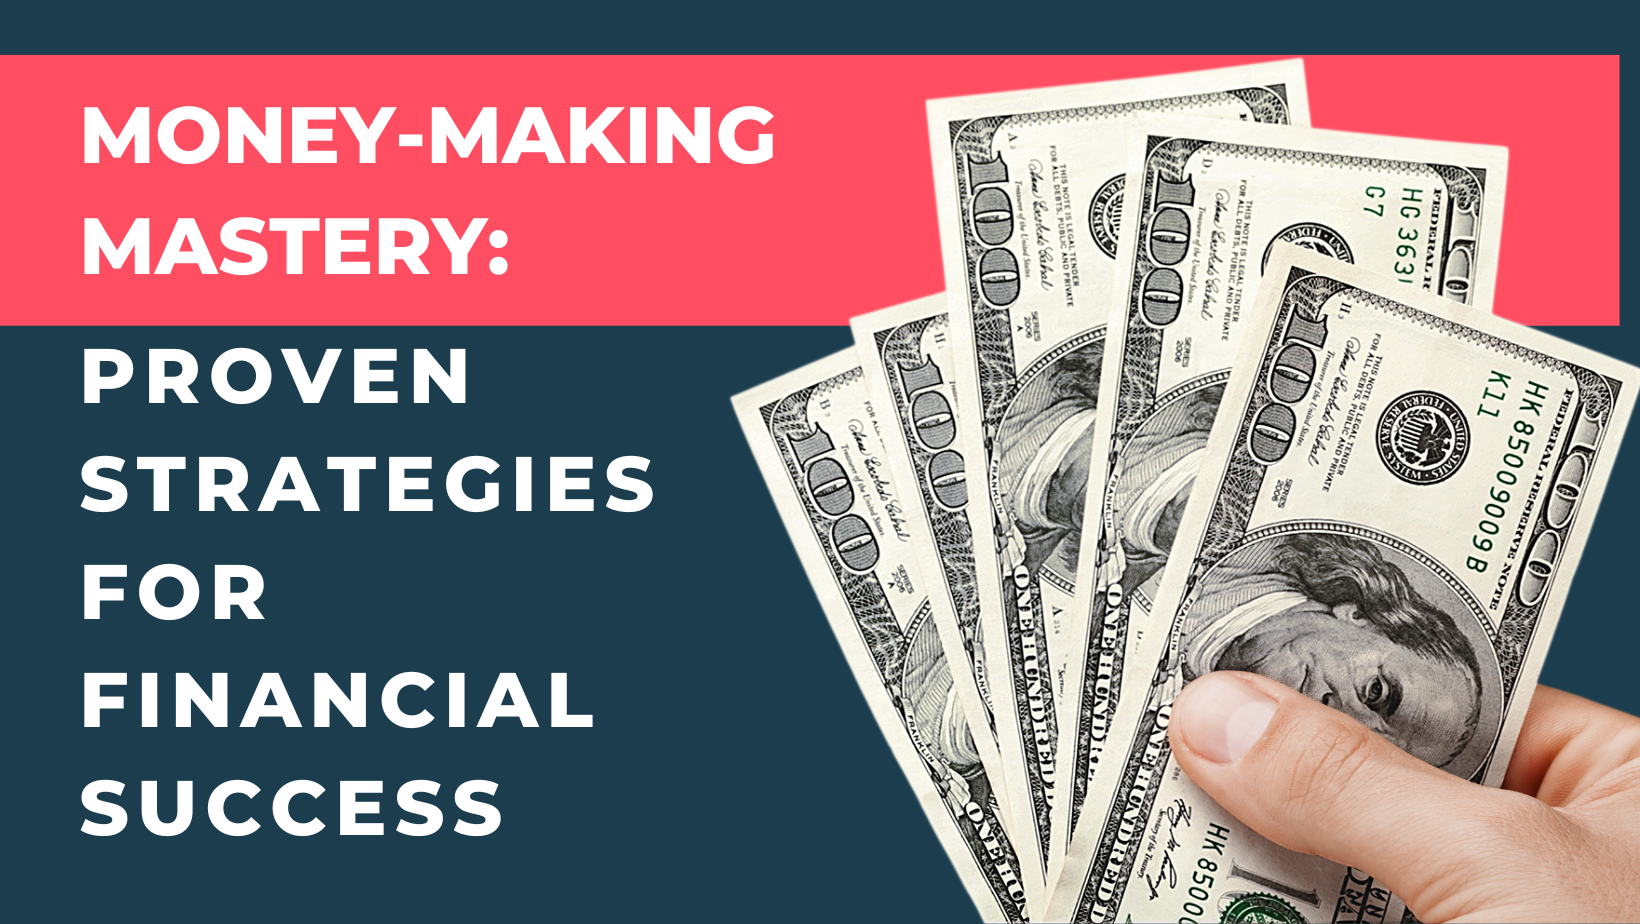 Money-Making Mastery: Proven Strategies for Financial Success